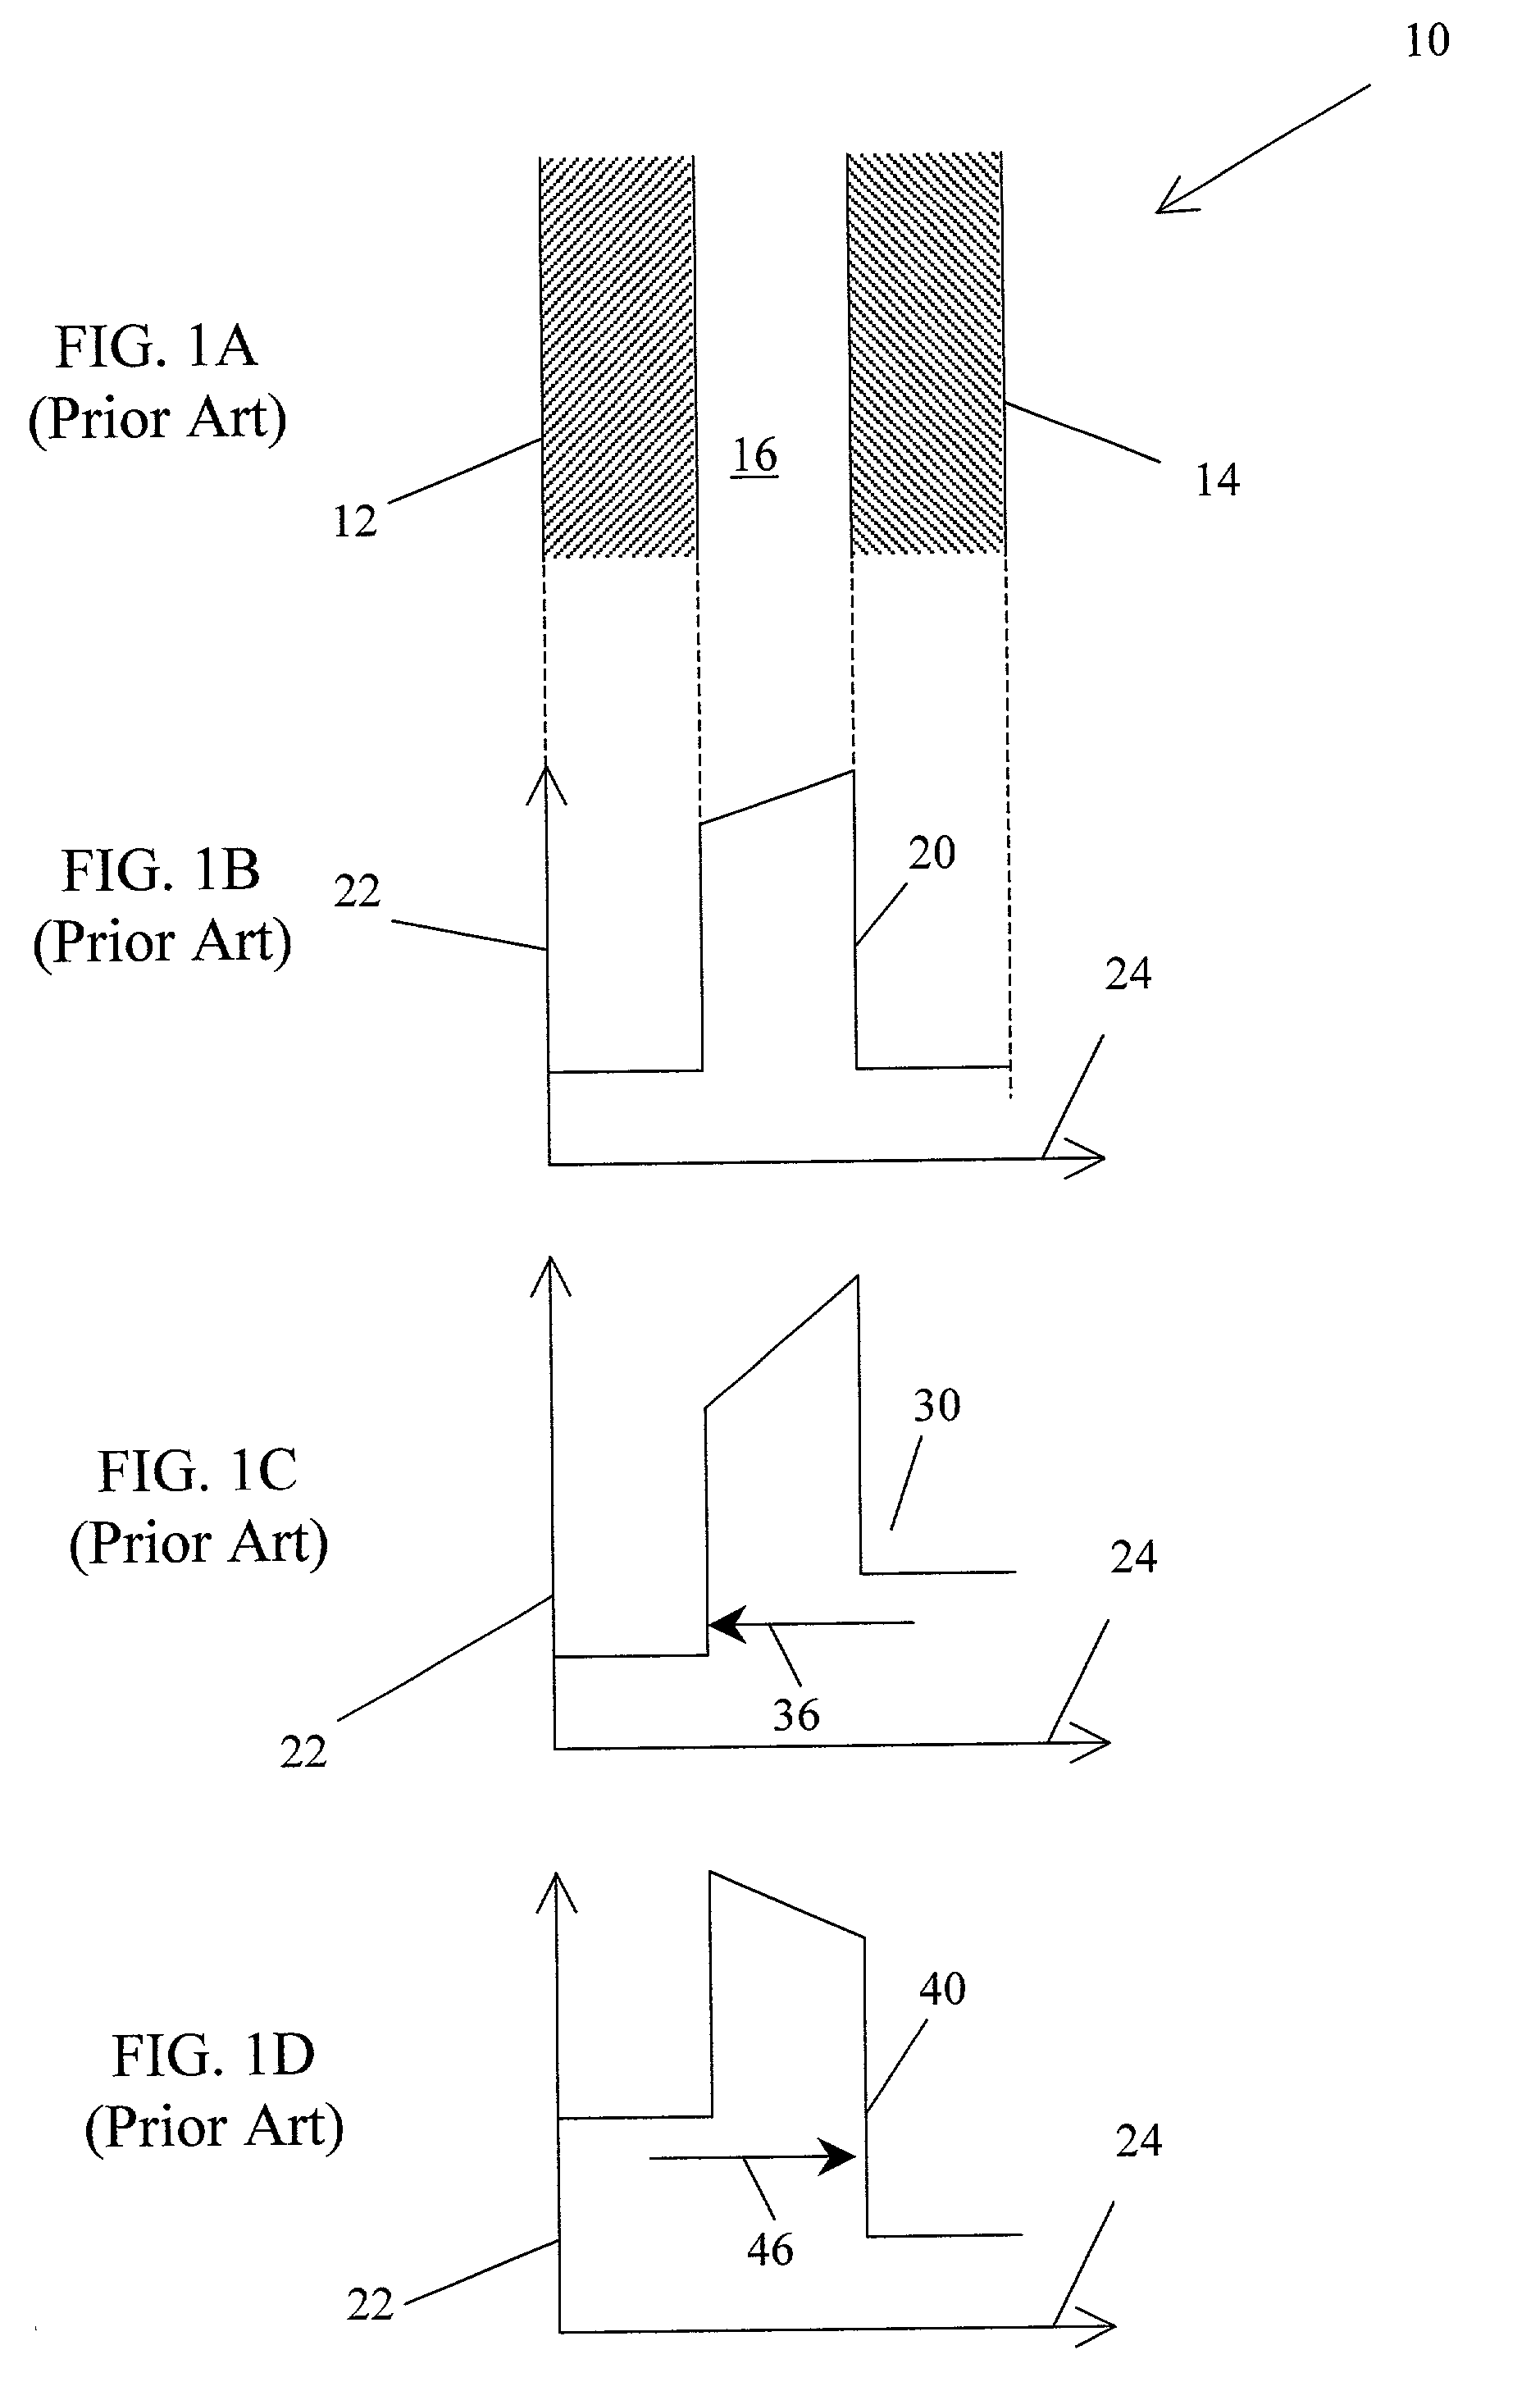 Metal-oxide electron tunneling device for solar energy conversion